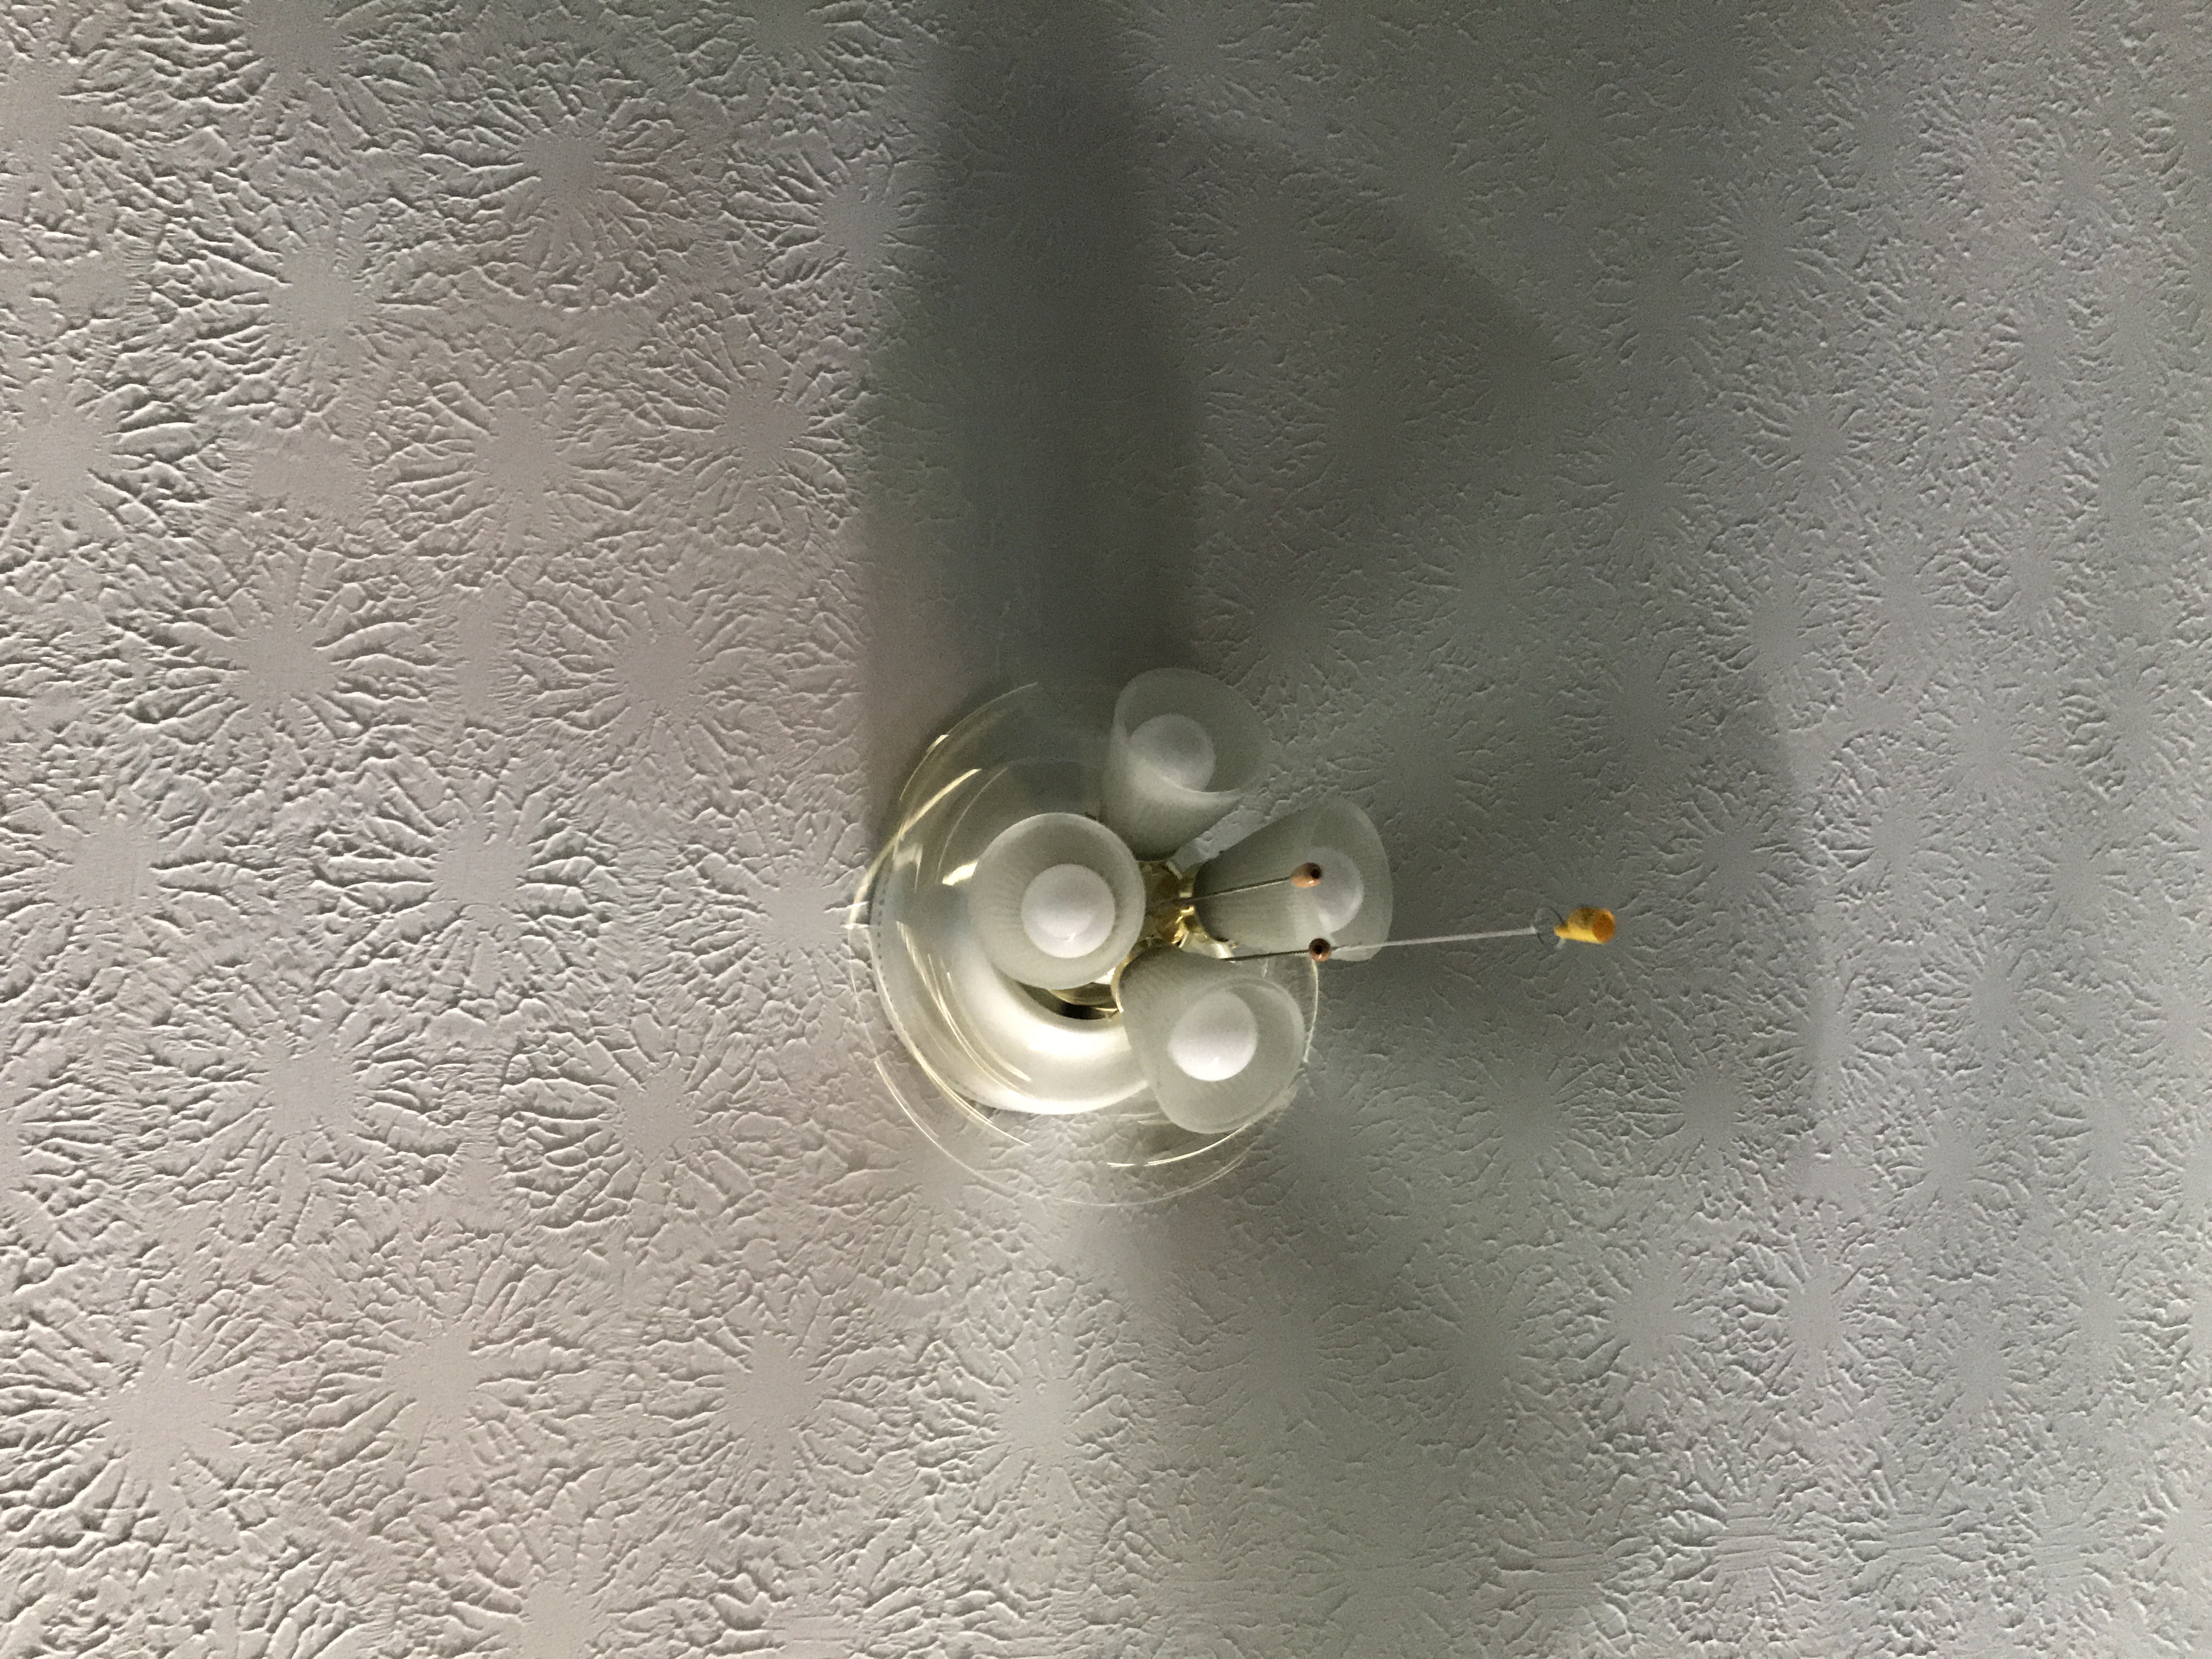 2 Photos of a ceiling fan, one with light on and one with light off.